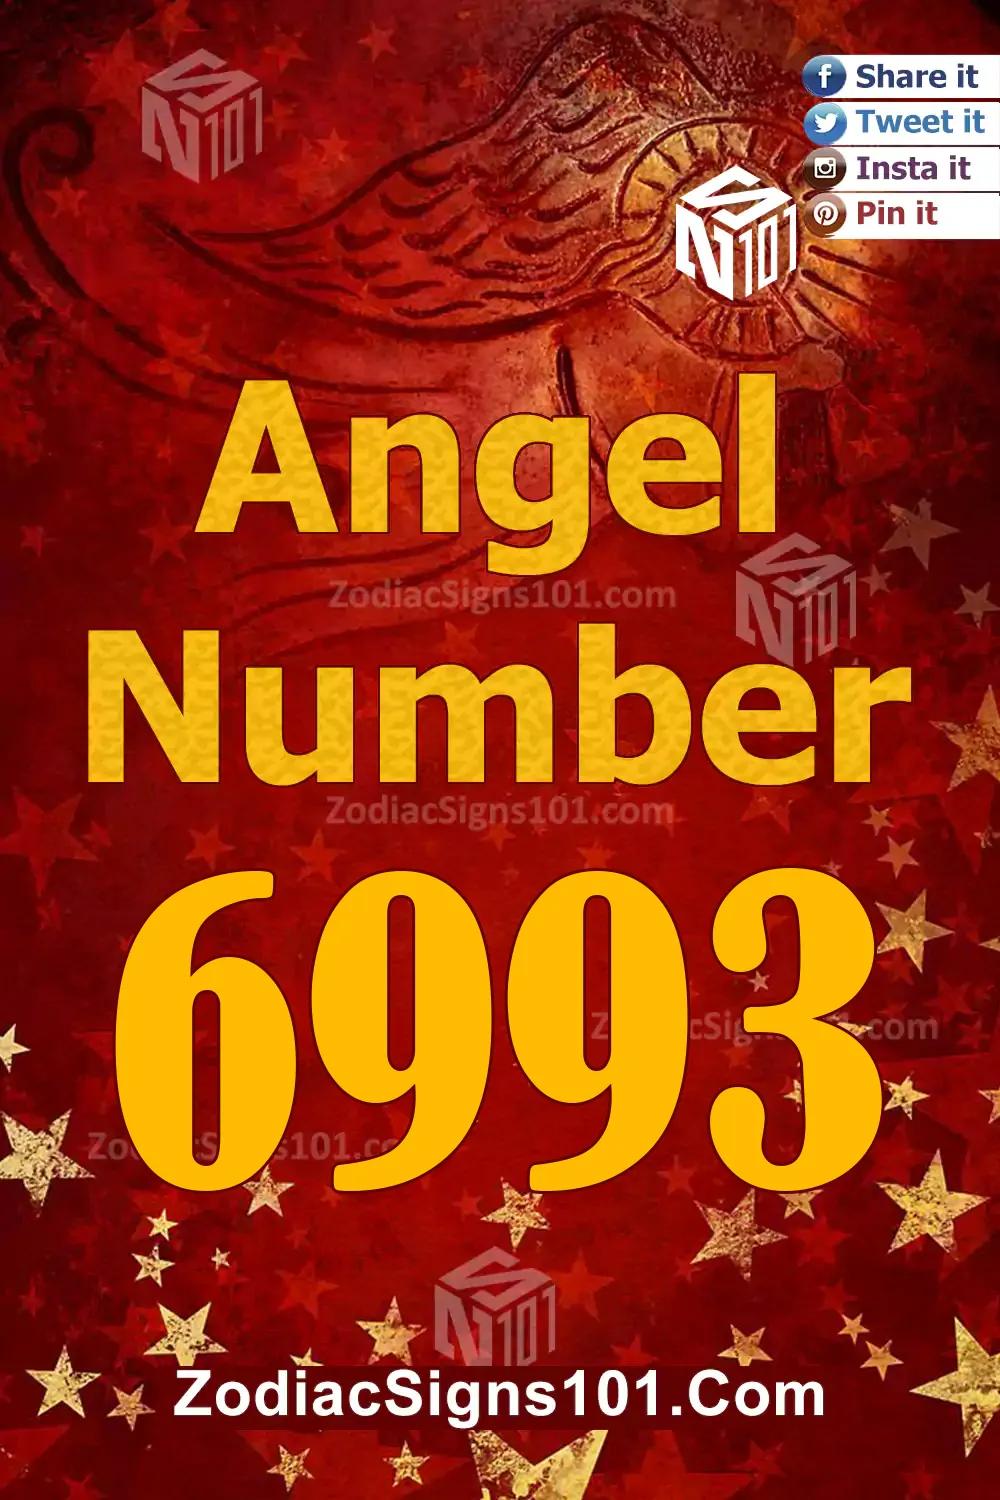 6993 Angel Number Meaning